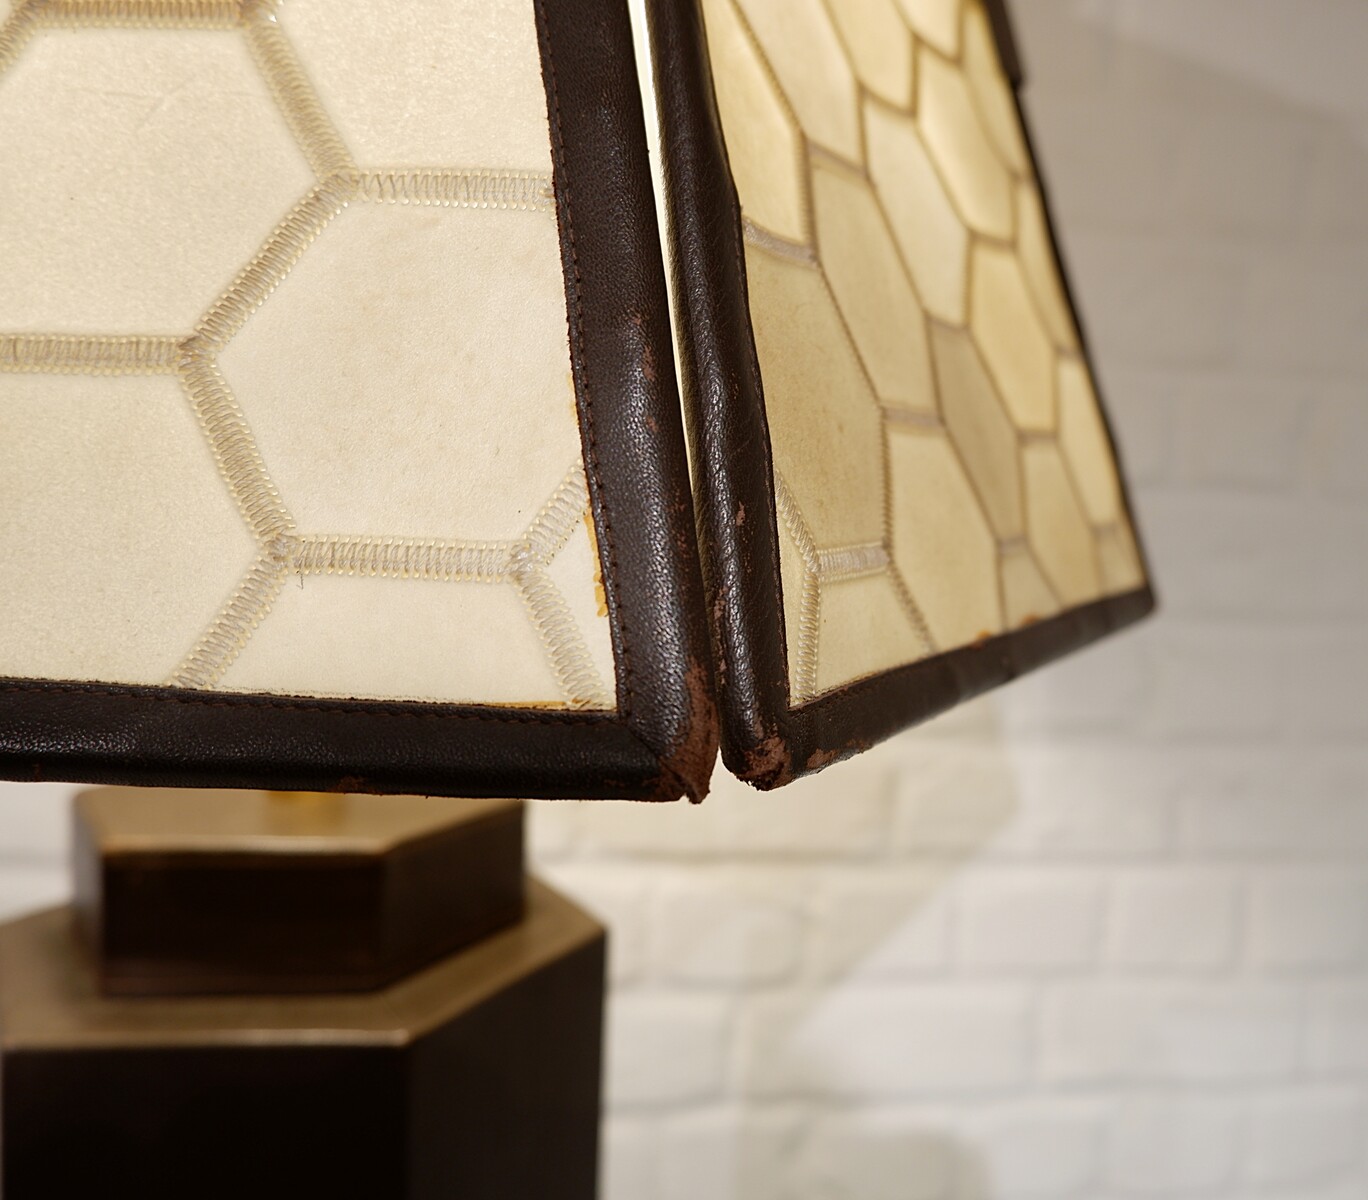 Brown Leather lamp and parchment lampshade, circa 1970